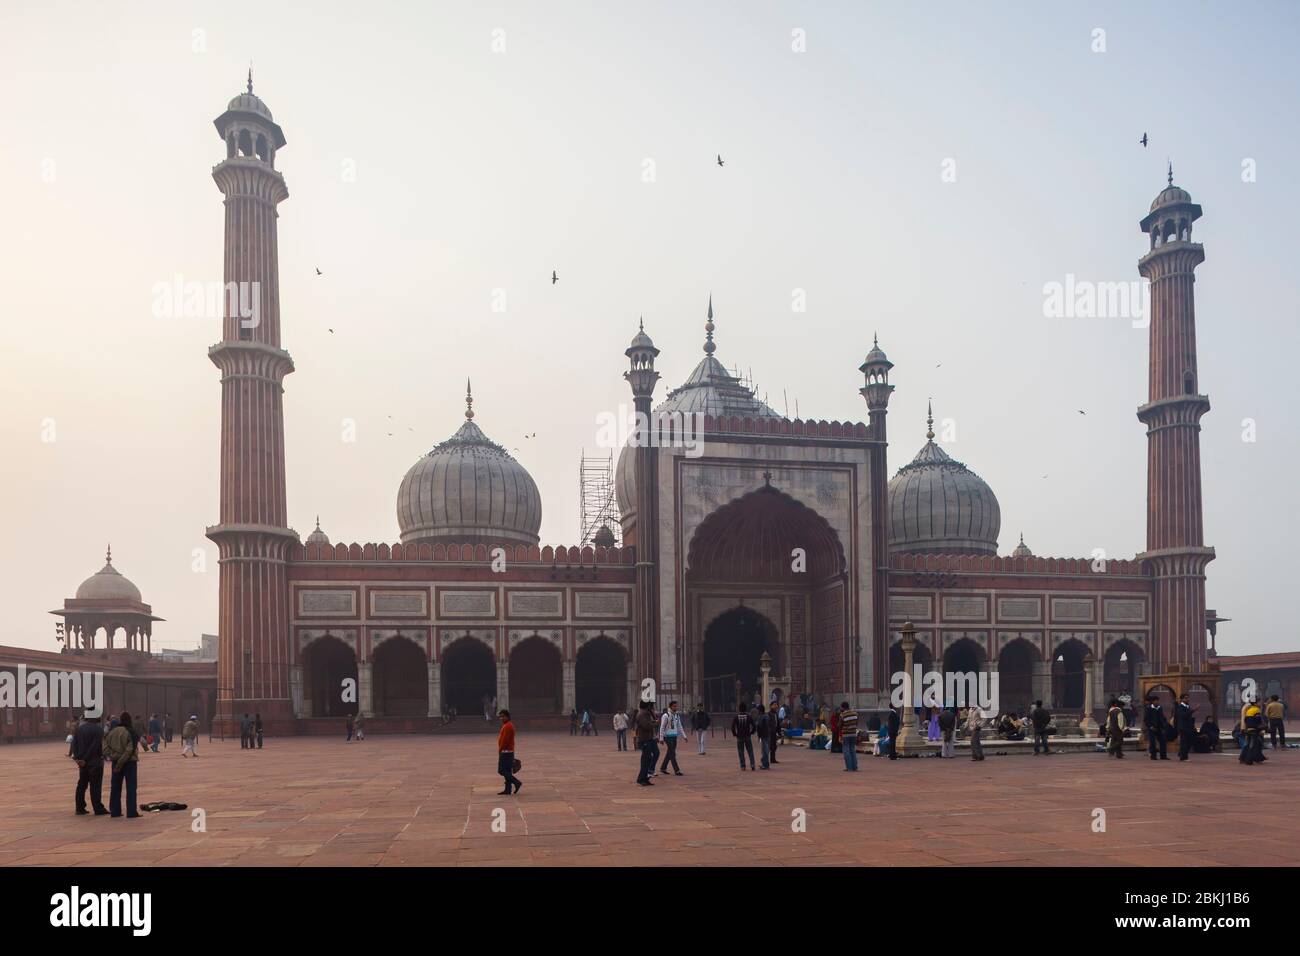 India, National Capital Territory of Delhi, Old Delhi, esplanade and facade of the Jama Masjid Mosque built by Mughal emperor Shah Jahan in 1656 Stock Photo